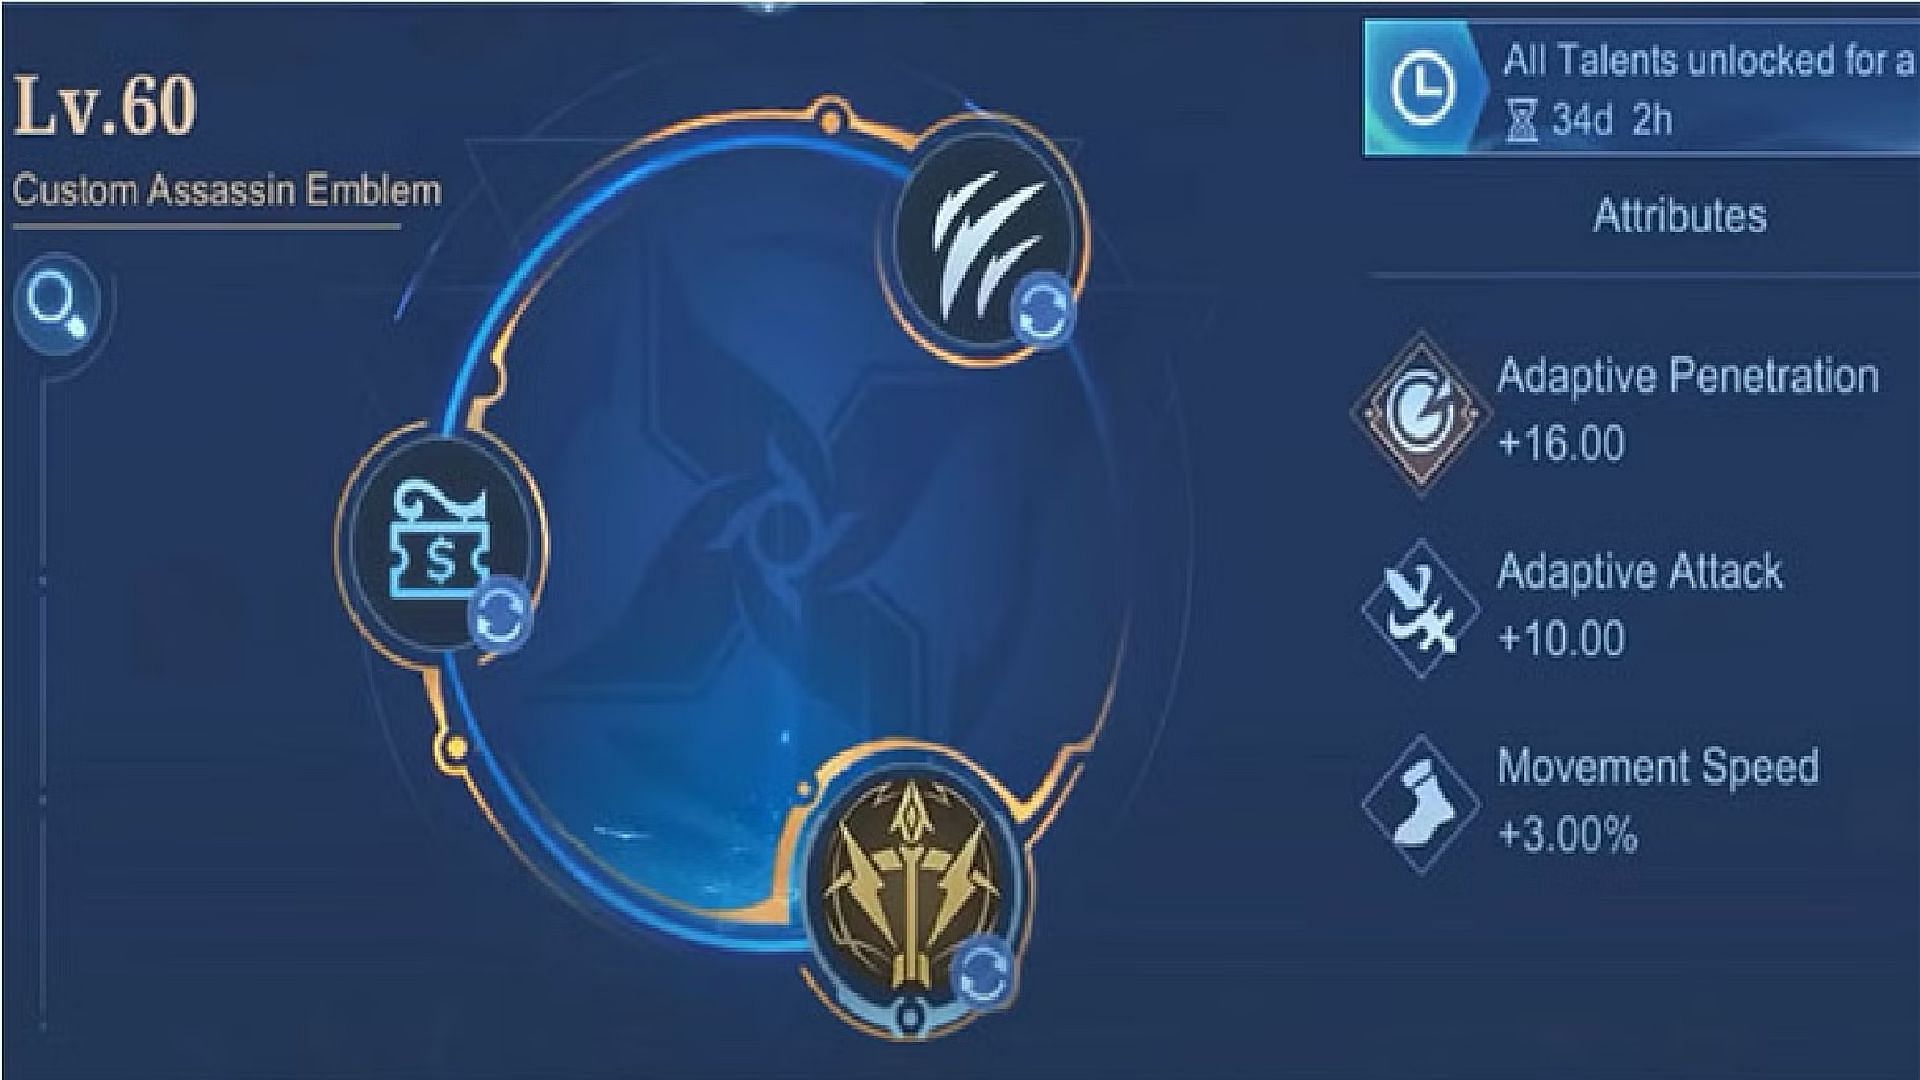 Despite being a Mage, units like Harley can also work with an Assassin Emblem and Wishing Lantern included in their build (Image via Moonton Games)